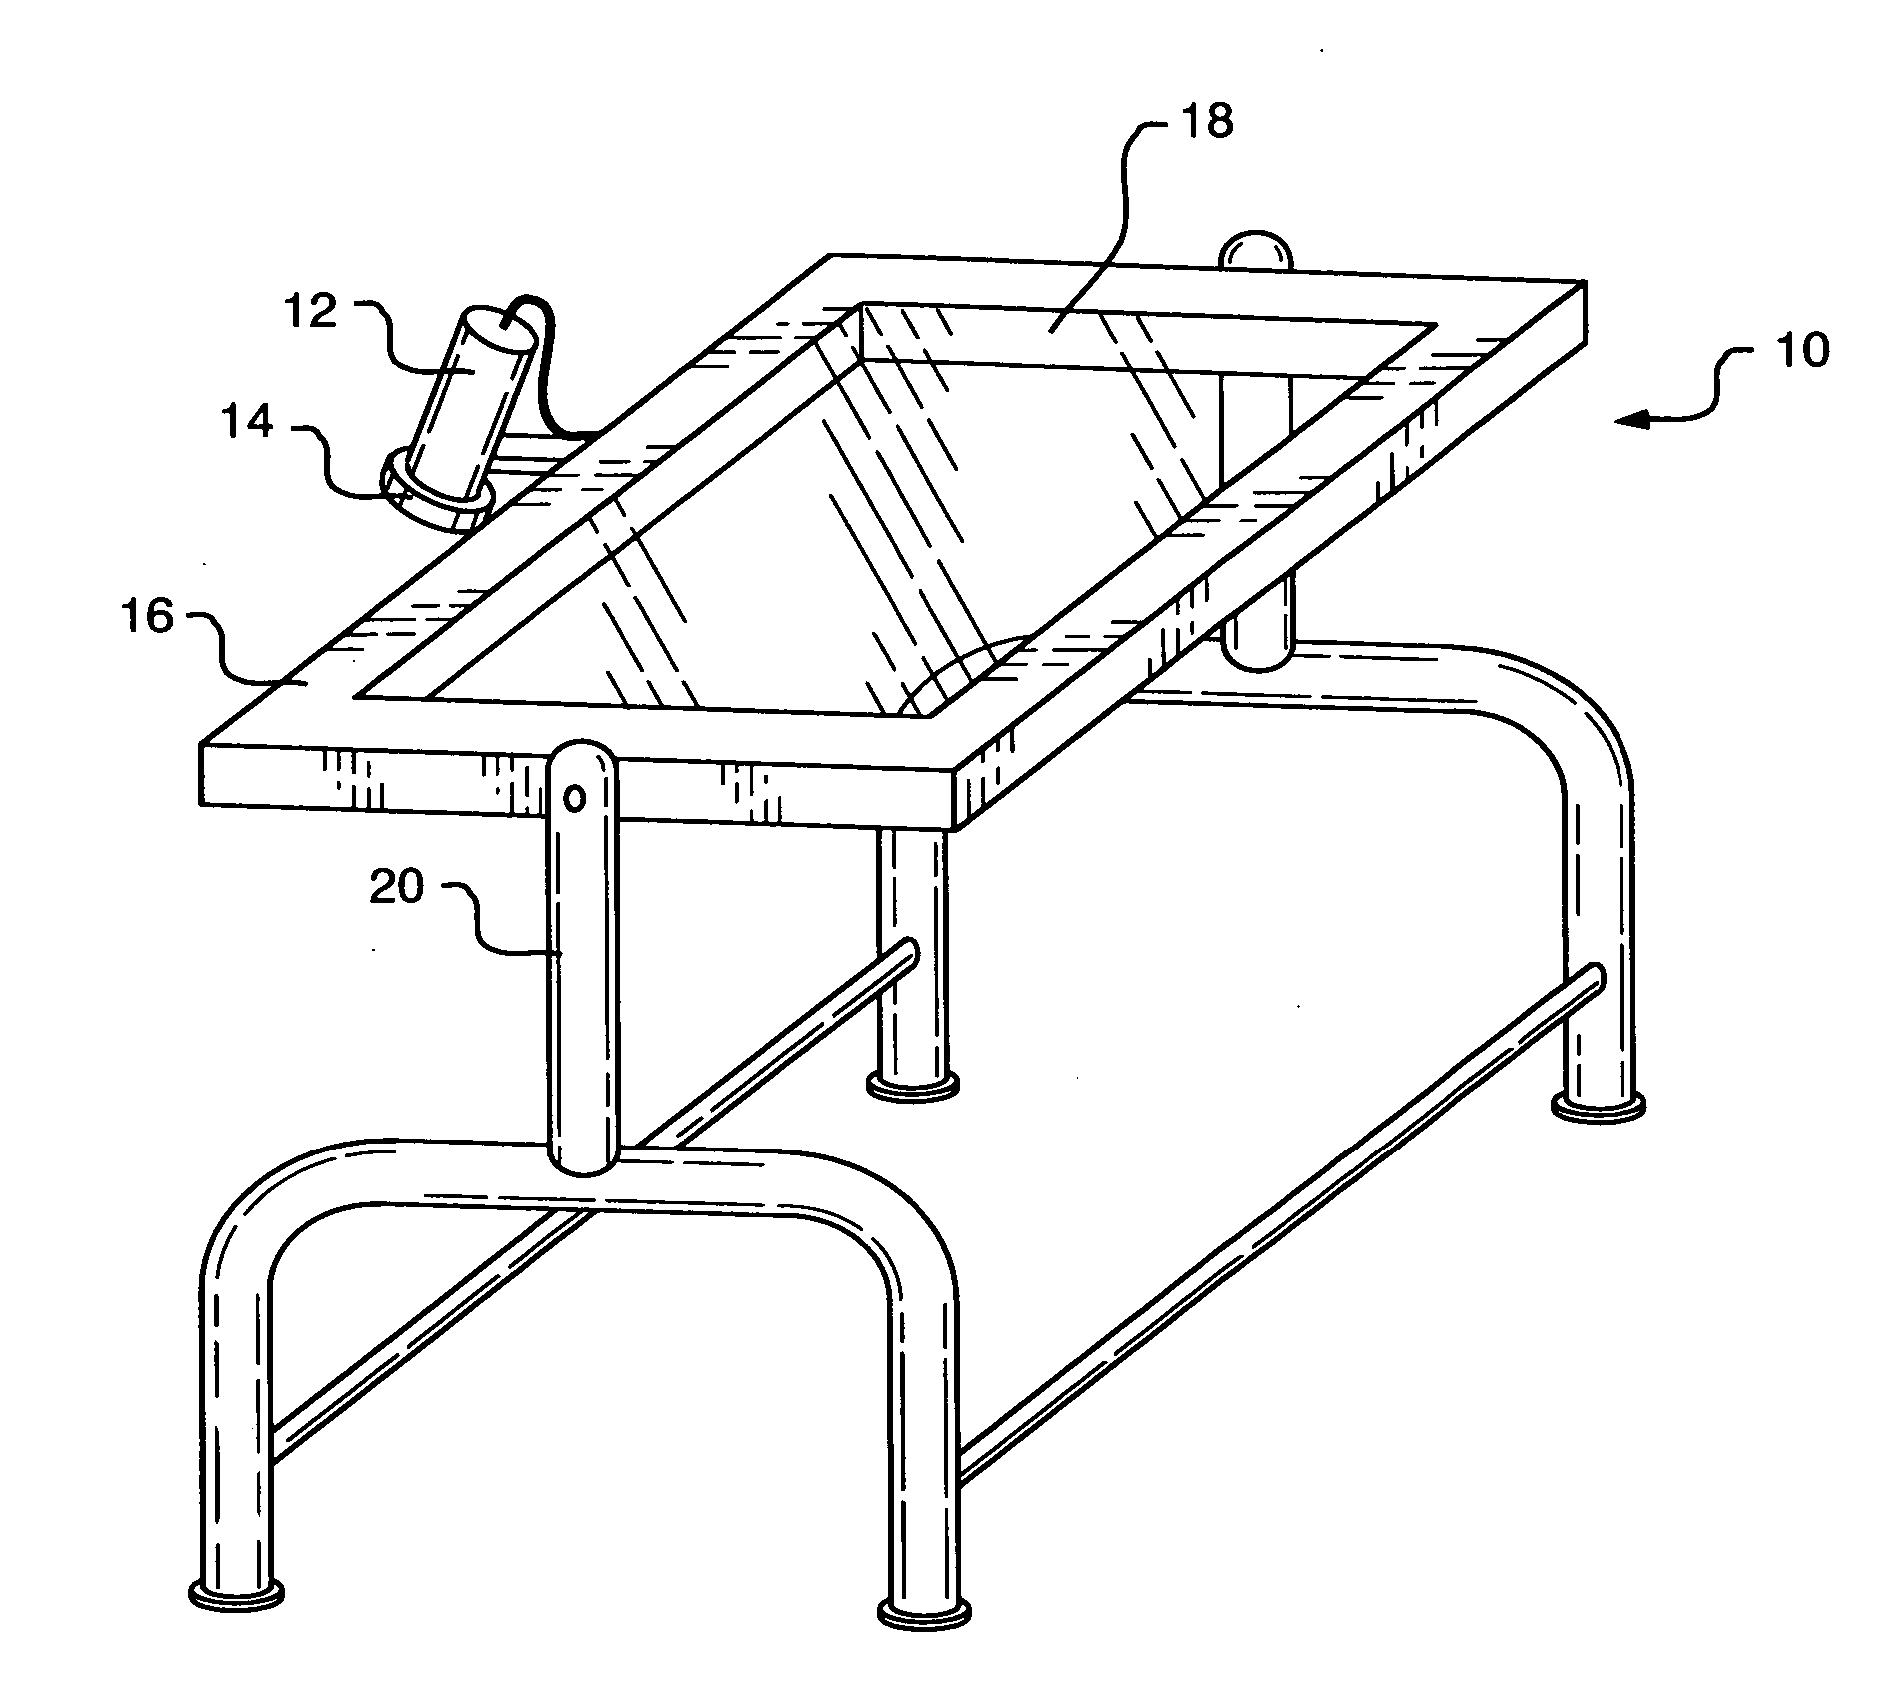 Polarized material inspection apparatus and system